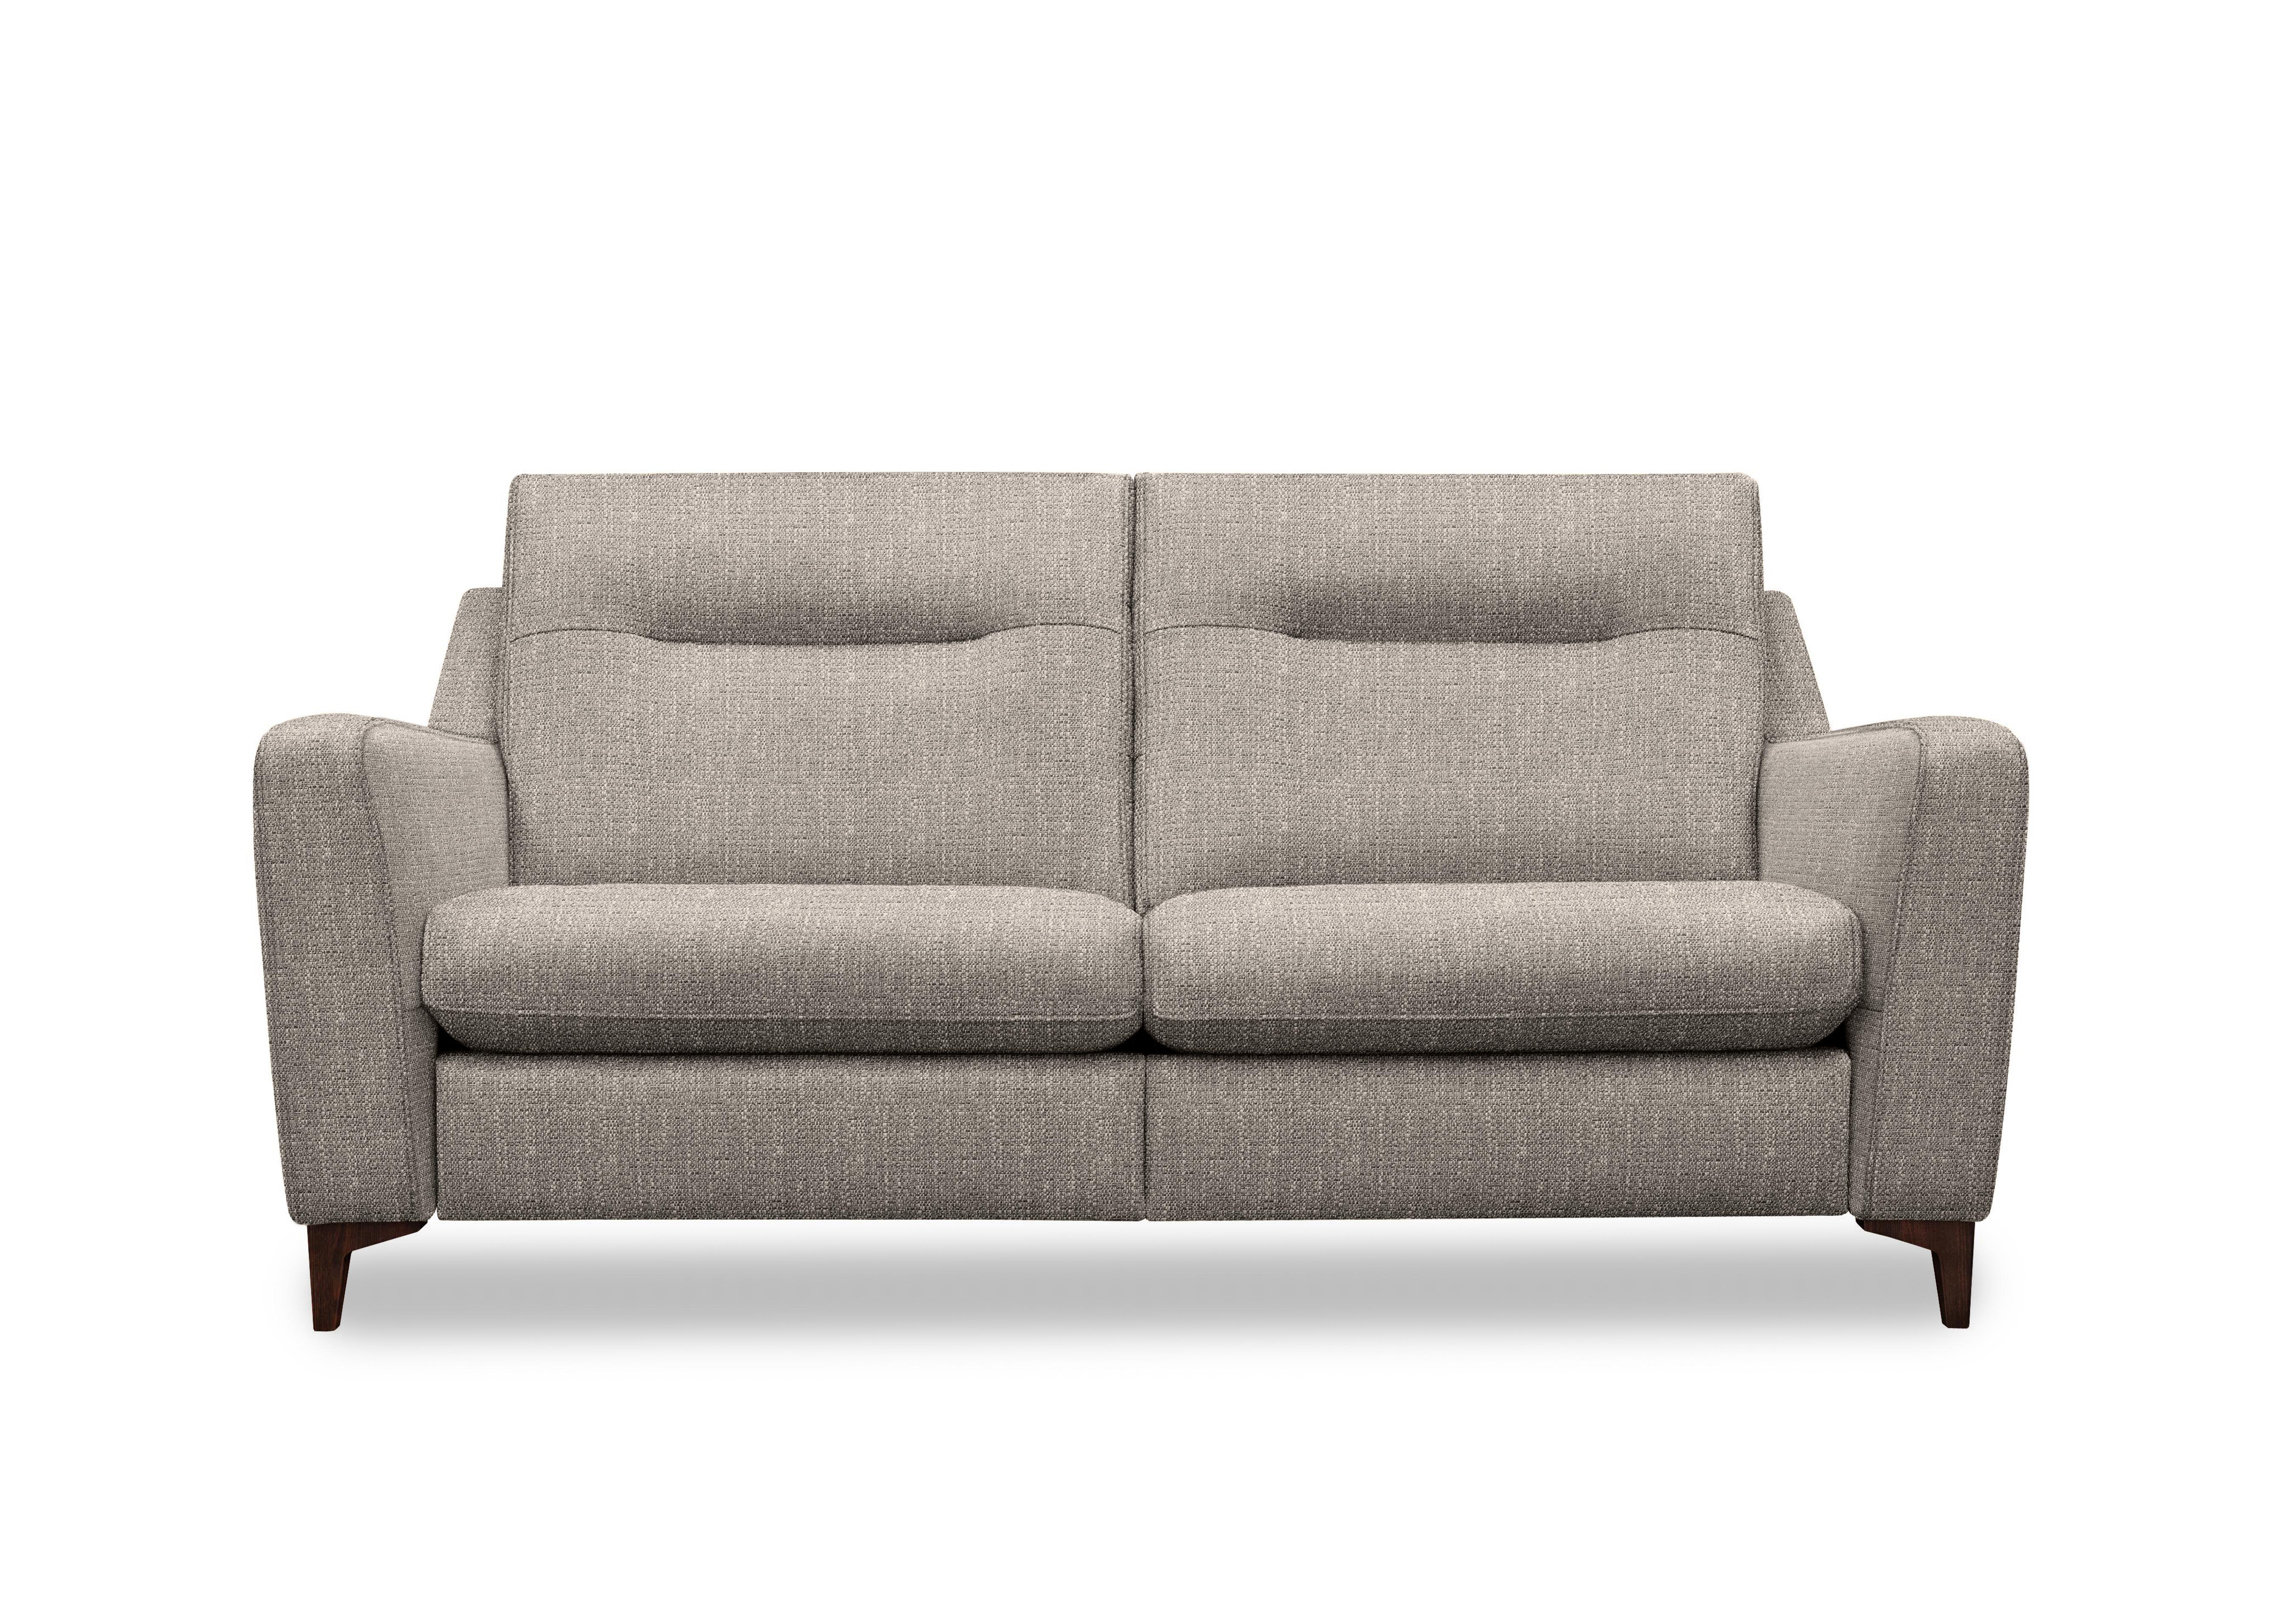 Arlo 3 Seater Fabric Sofa in B135 Libby Sand Wal Ft on Furniture Village